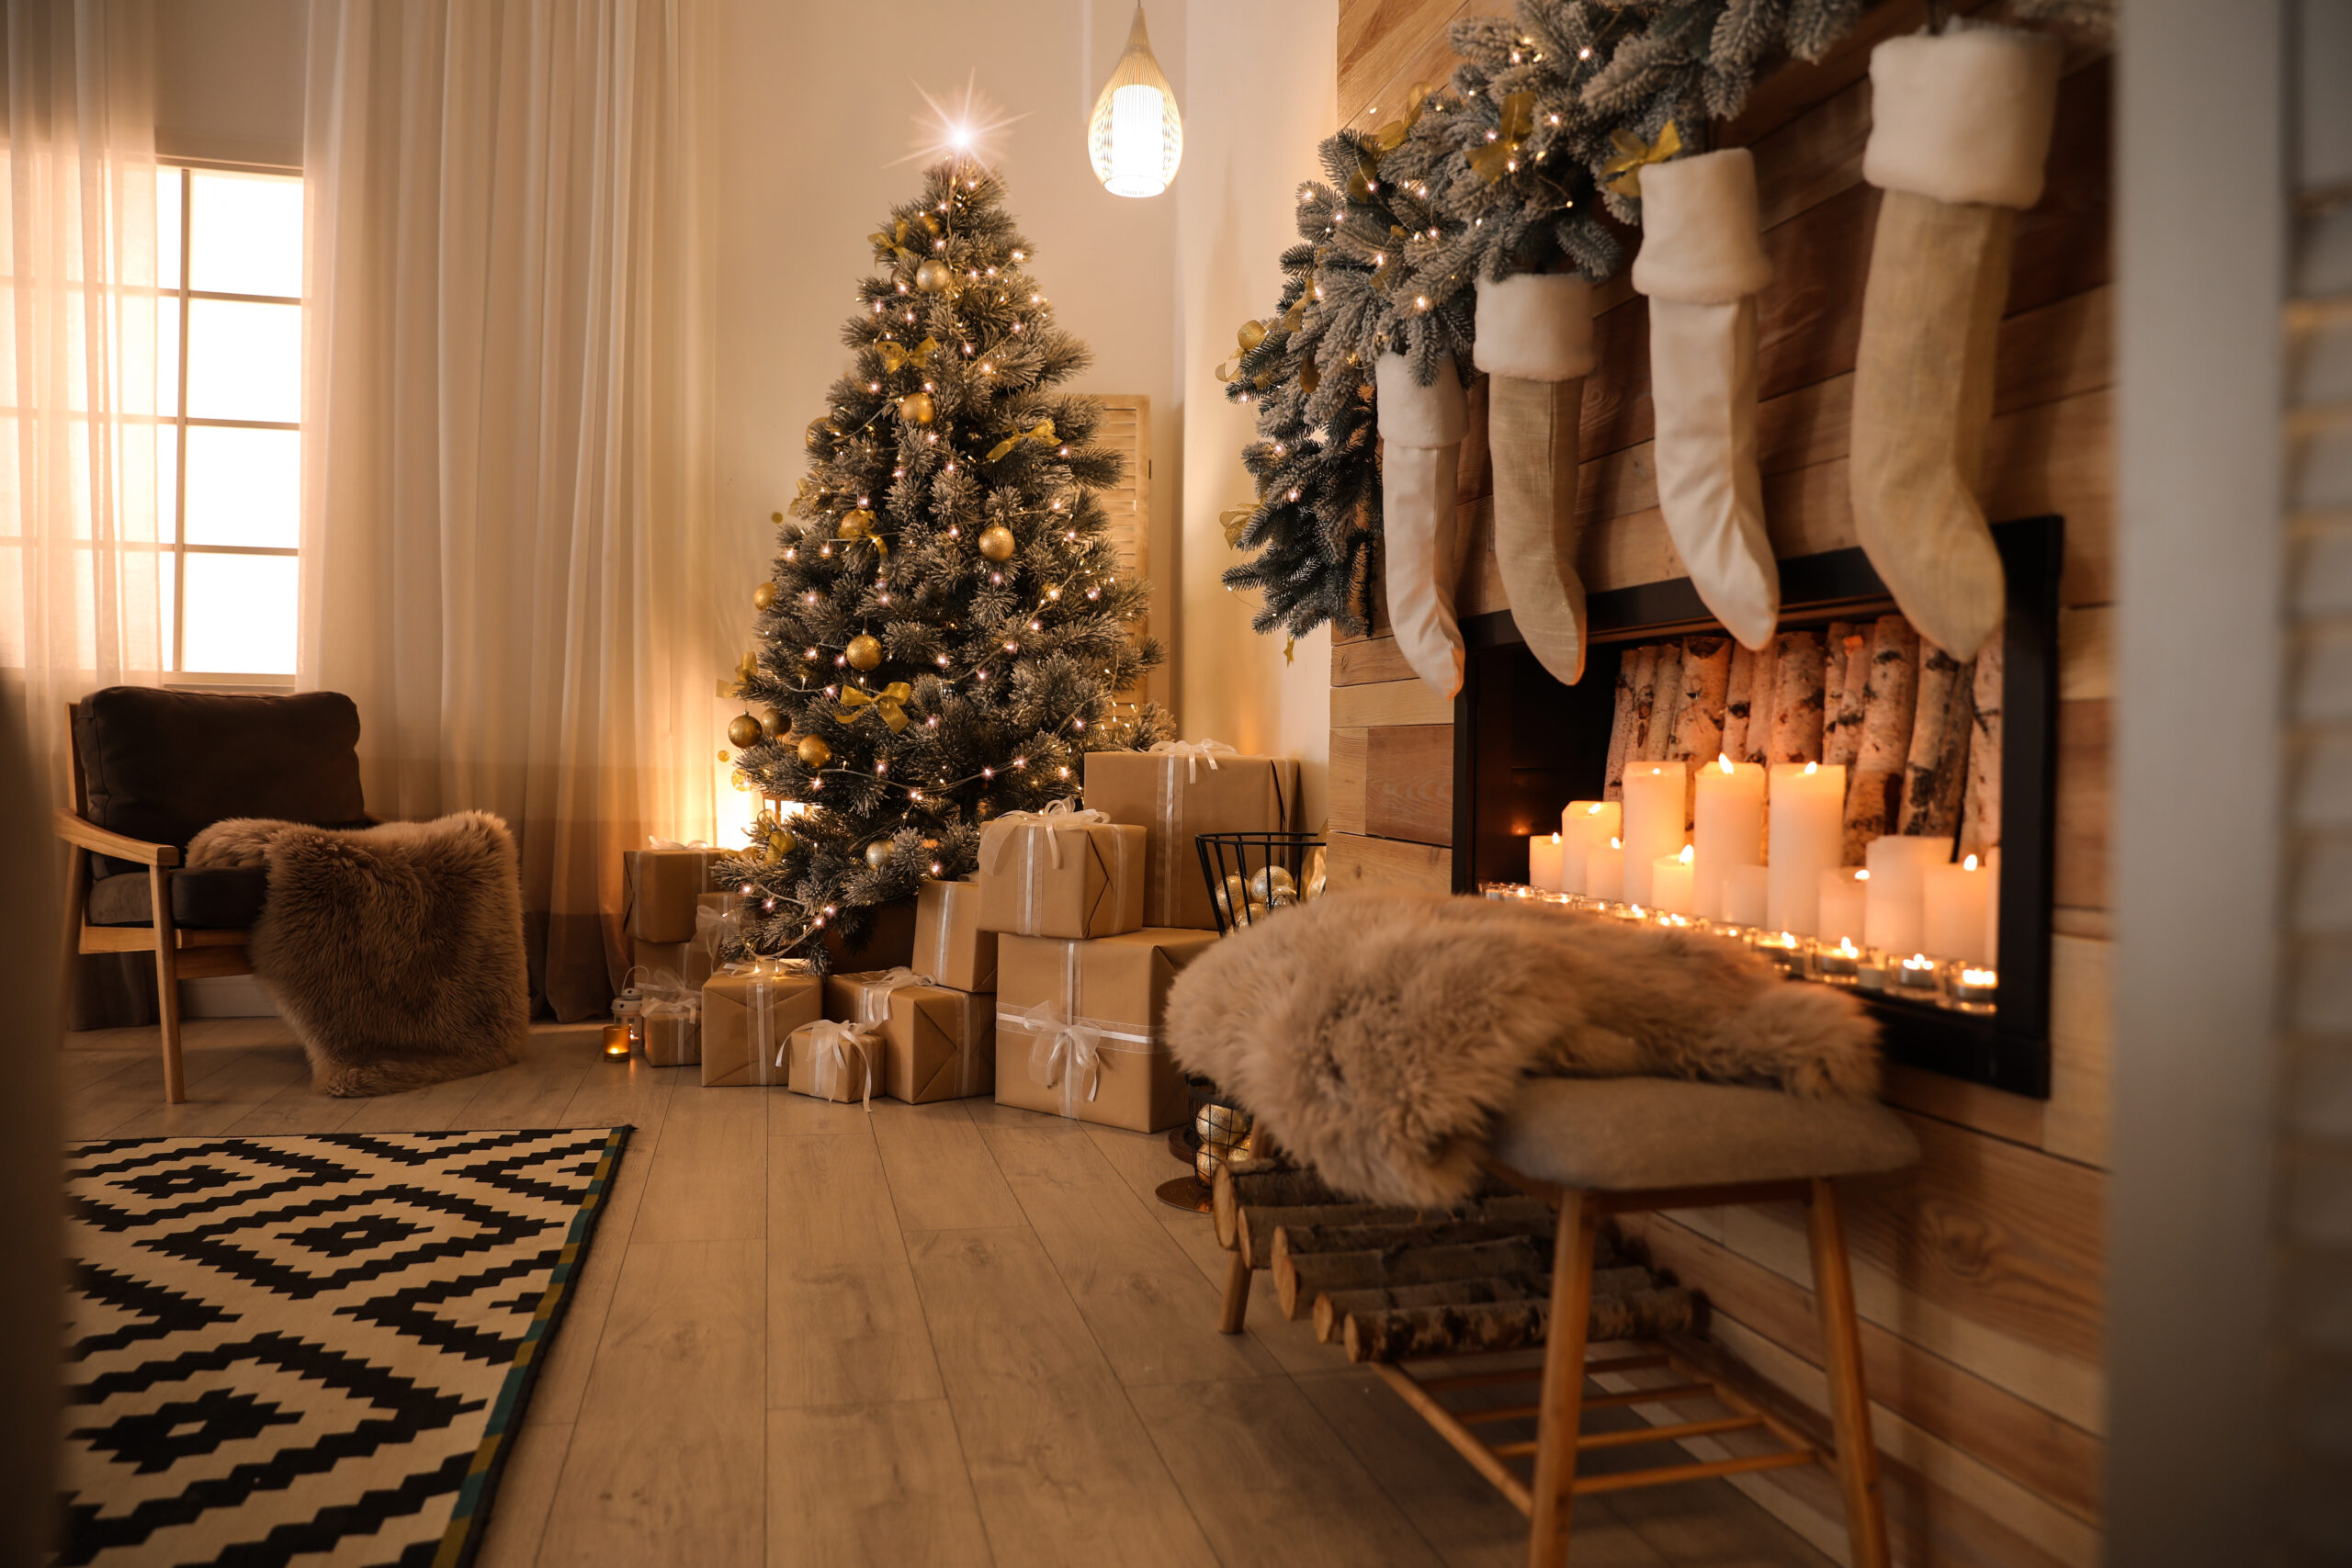 Stylish room interior with beautiful Christmas tree and decorative fireplace...